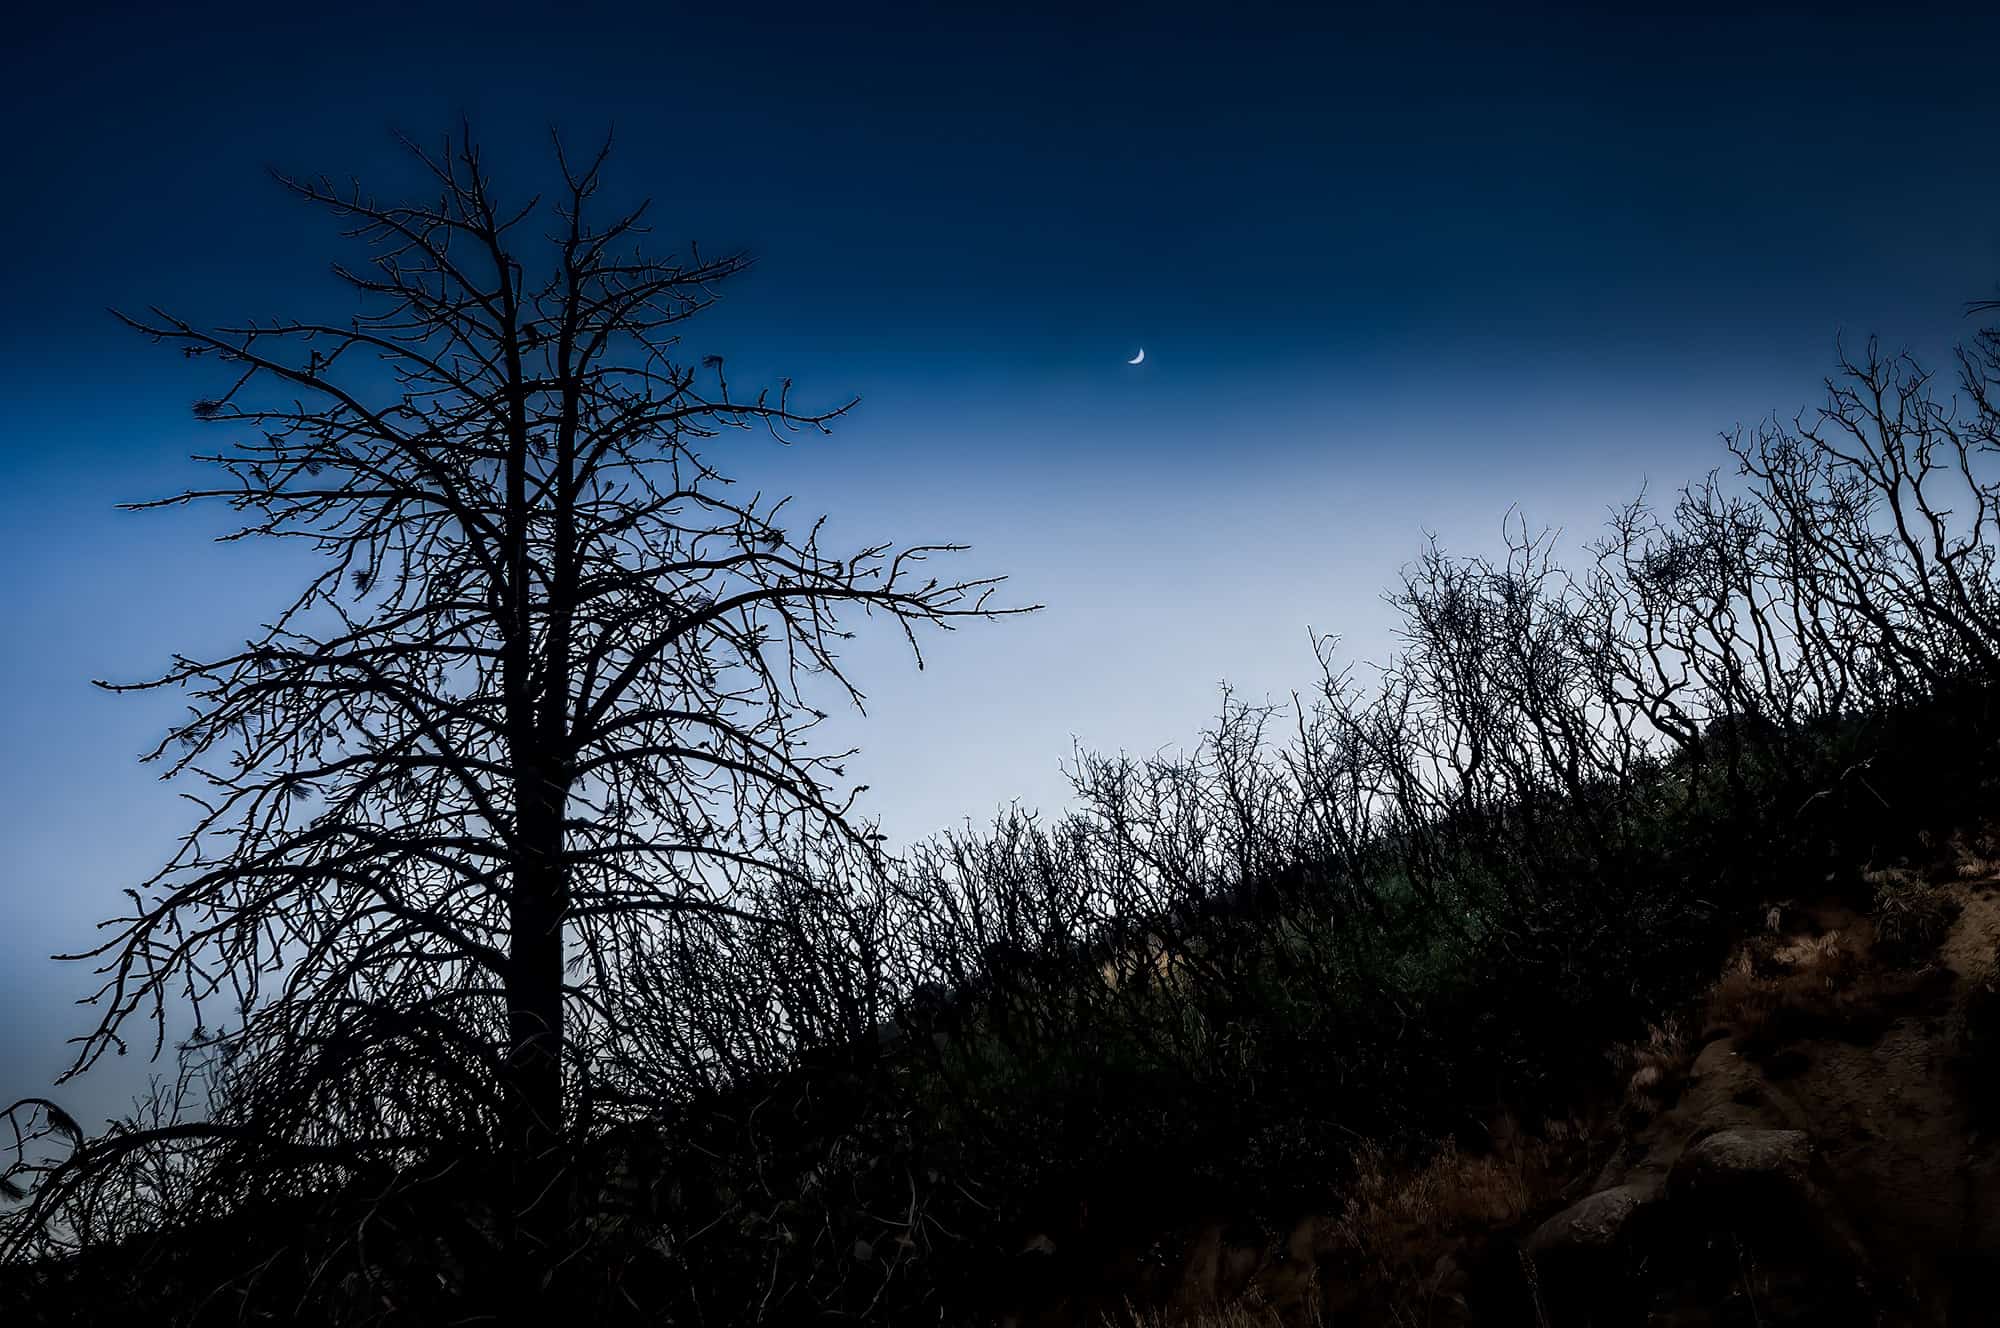 Late evening view of a bare Split Tree and shrubs with Moon 